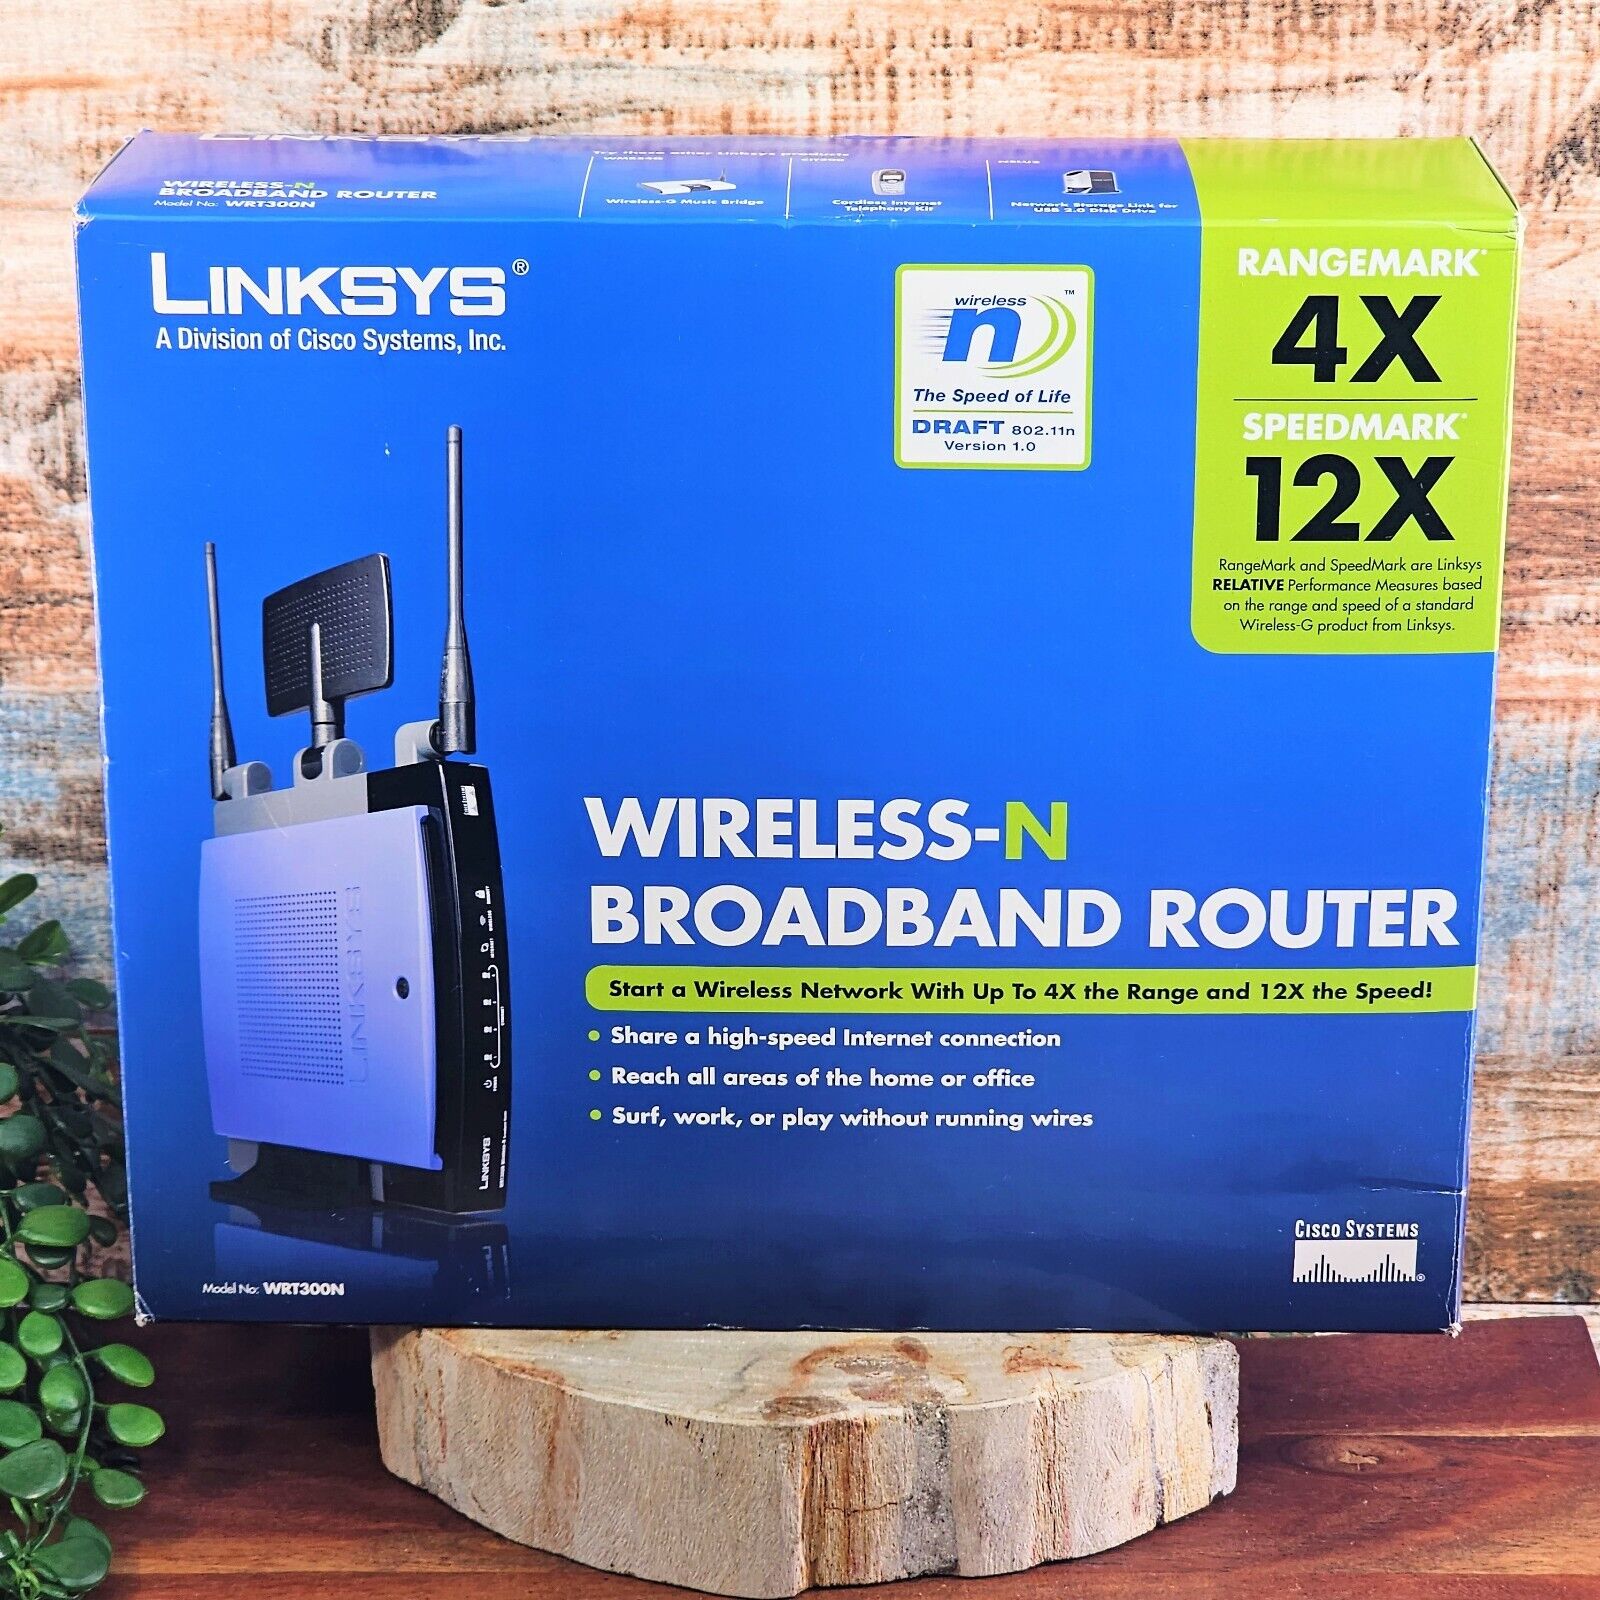 Linksys WRT300N Wireless-N Broadband Router 4 Port MIMO Technology Cisco Systems